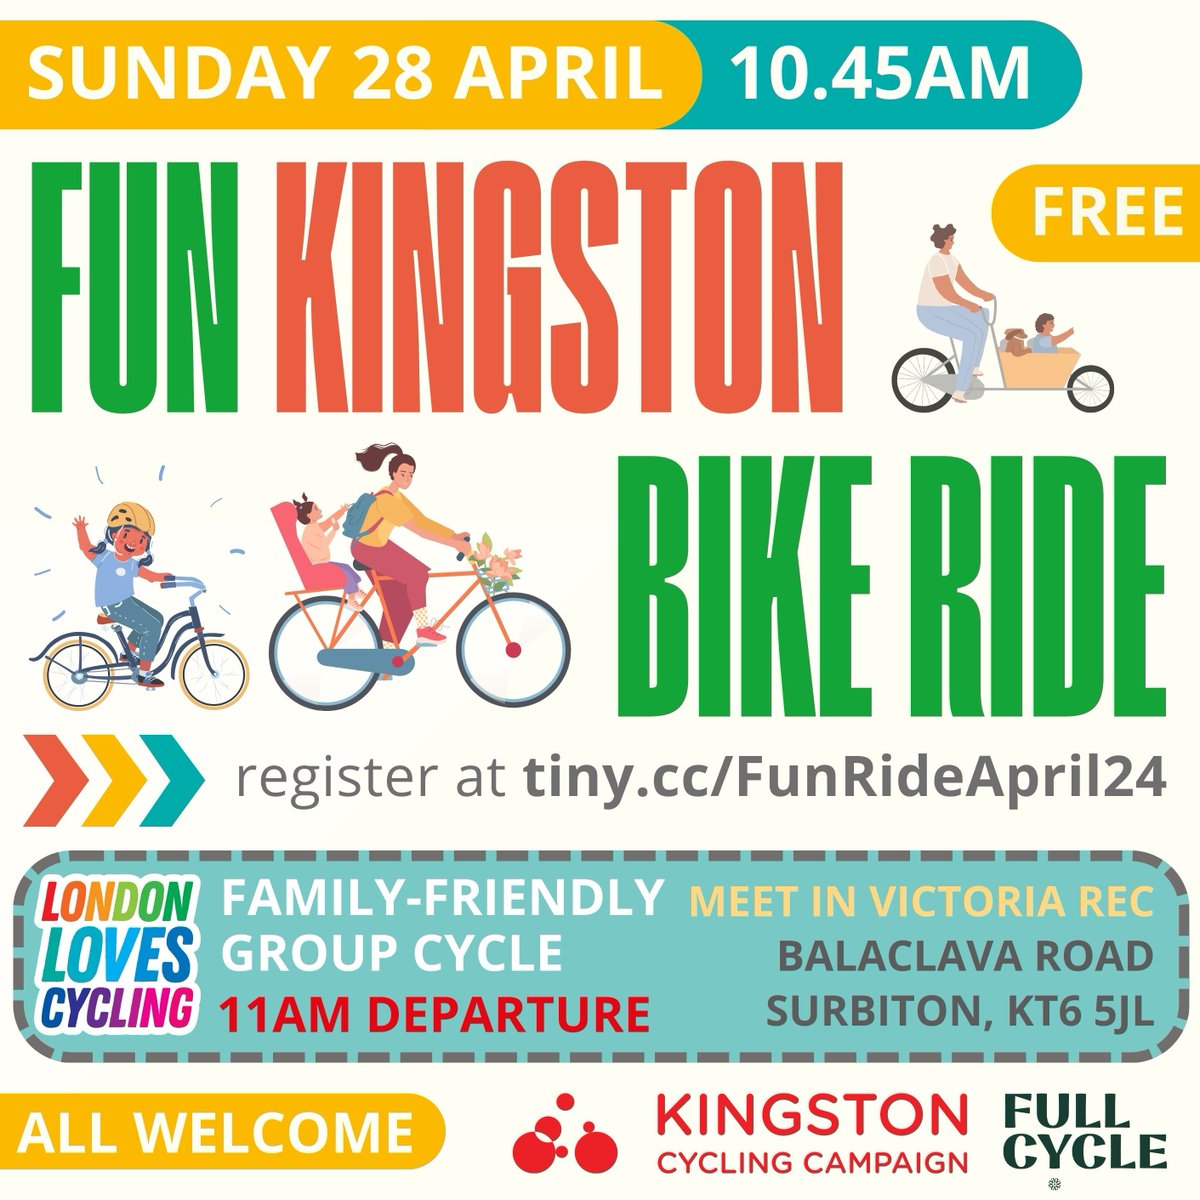 Join in the #LondonLovesCycling fun on 28 April as we celebrate the great range of cycle-friendly routes across Kingston! Our next confidence-boosting ride will start from Surbiton's Victoria Recreation Ground at 10.45am - visit tiny.cc/FunRideApril24 for more info & to sign up.